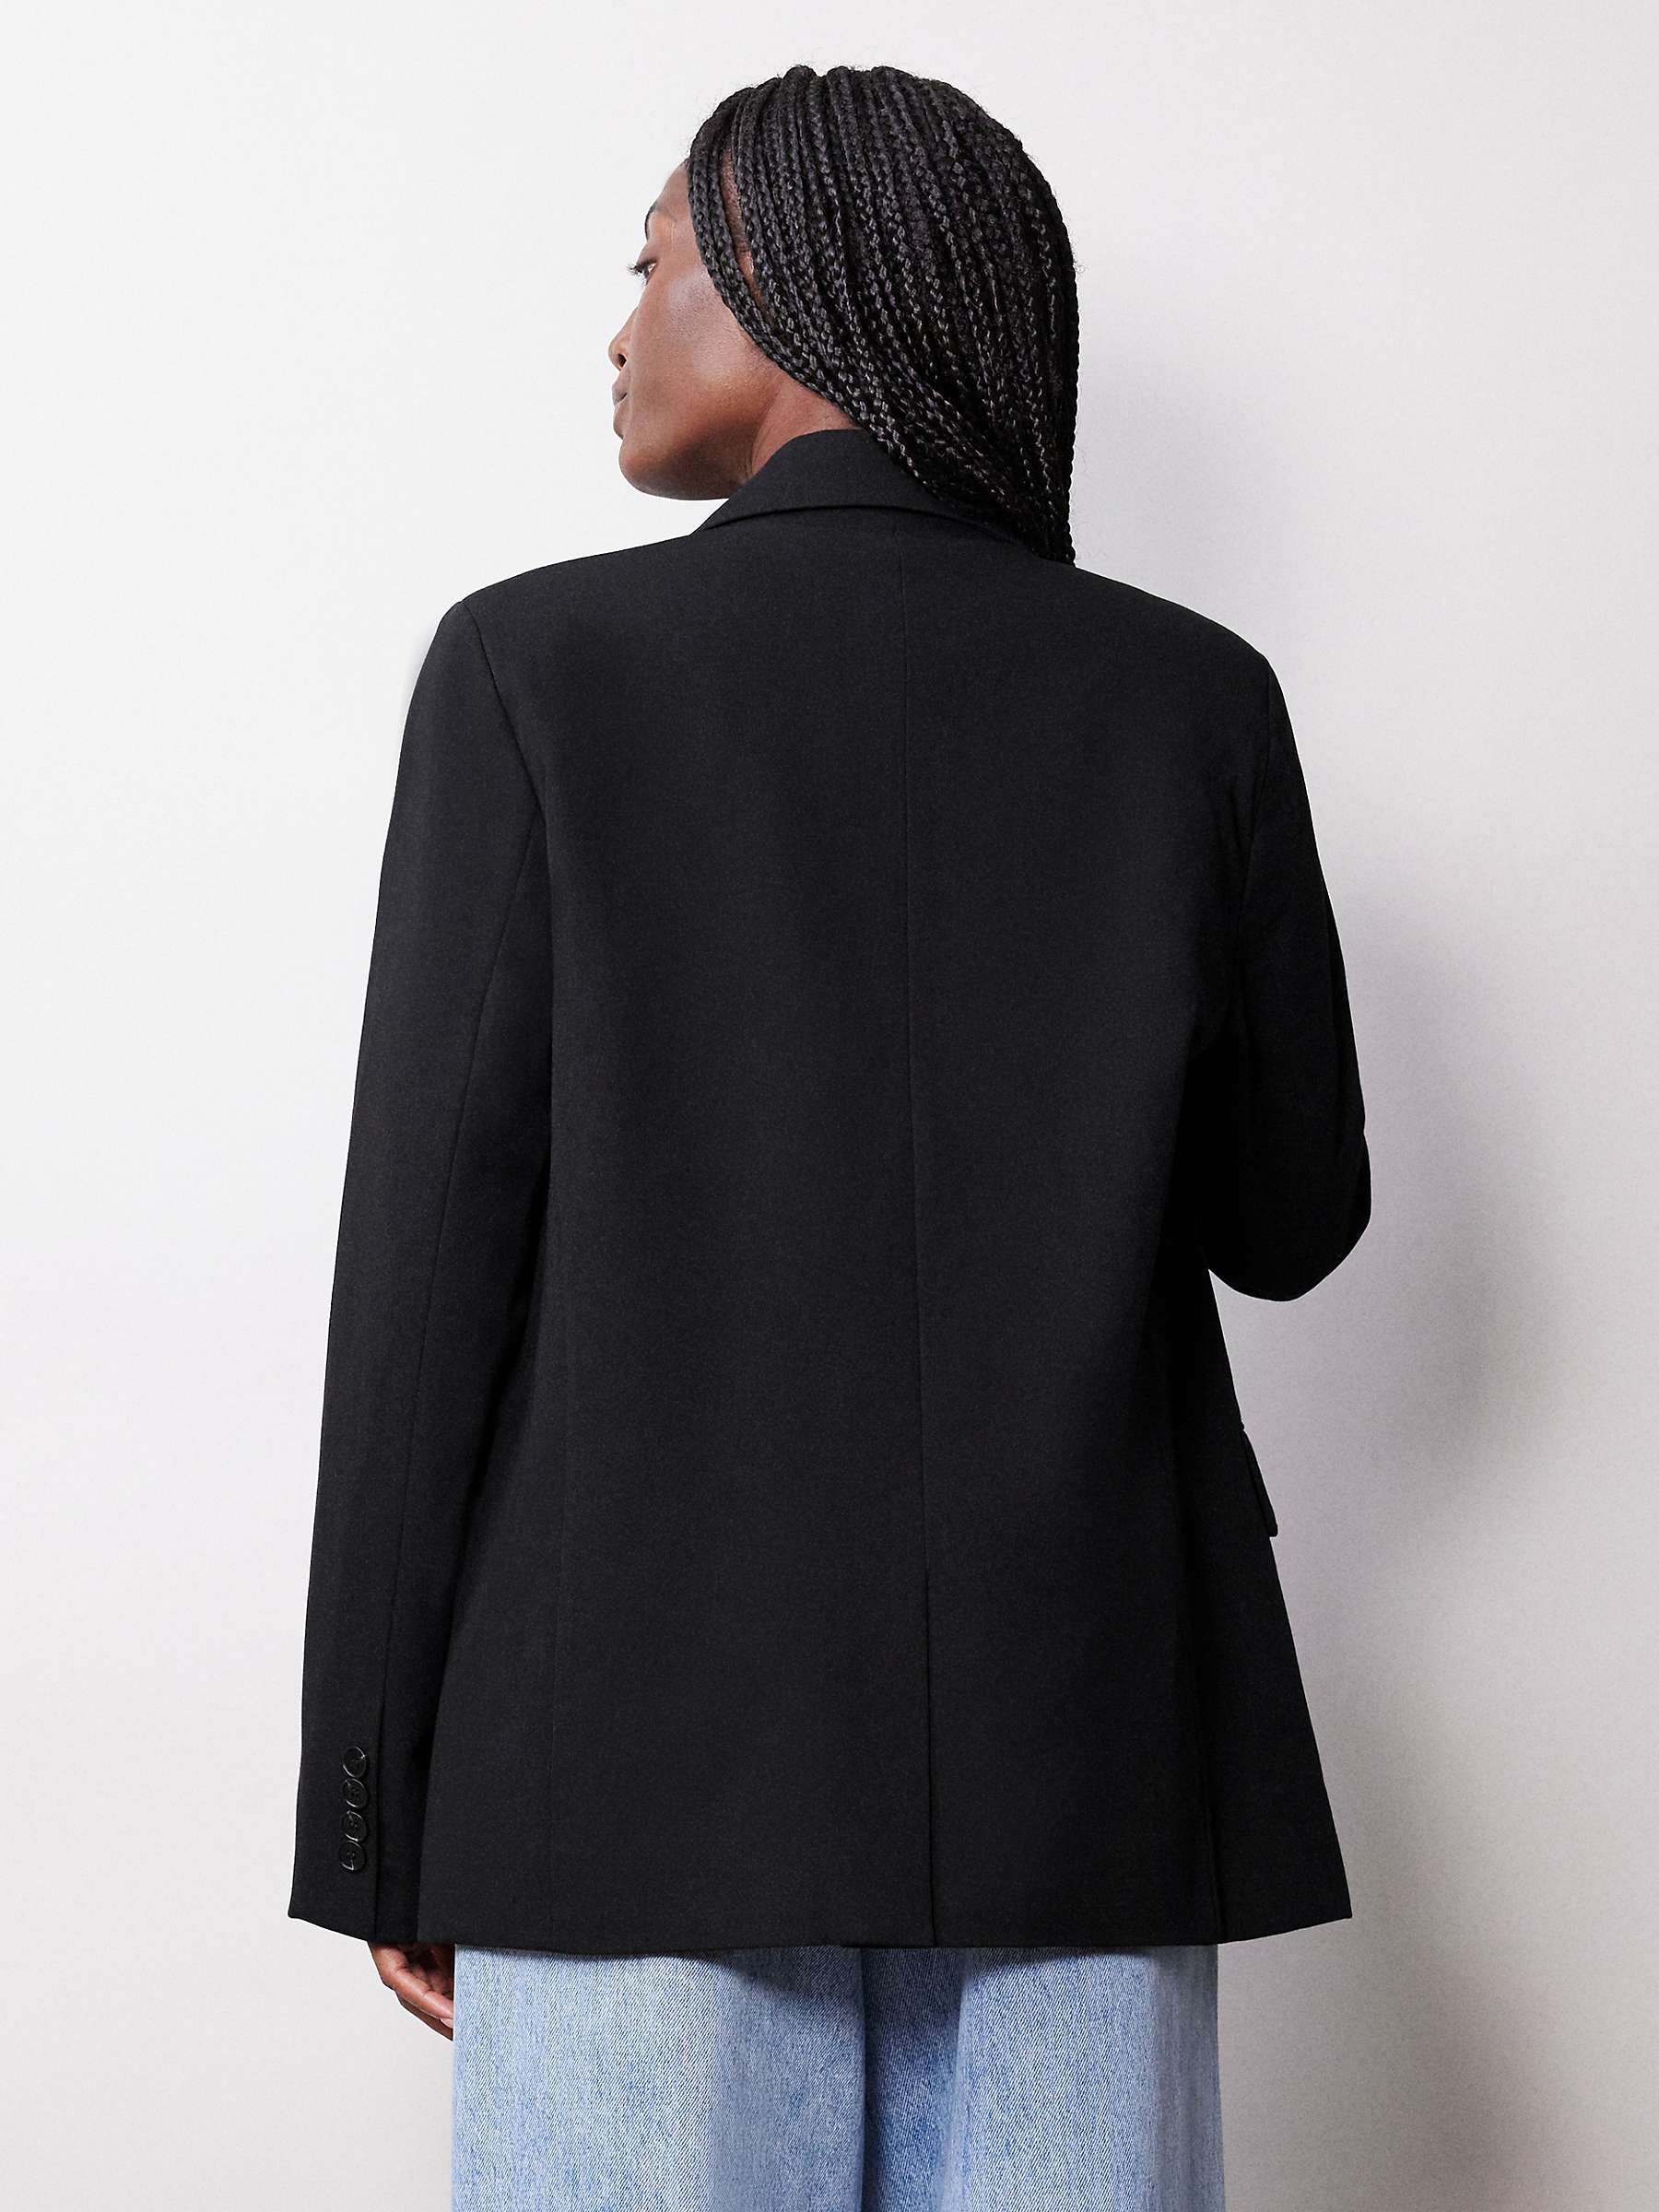 Buy Albaray Relaxed Tailored Jacket, Black Online at johnlewis.com